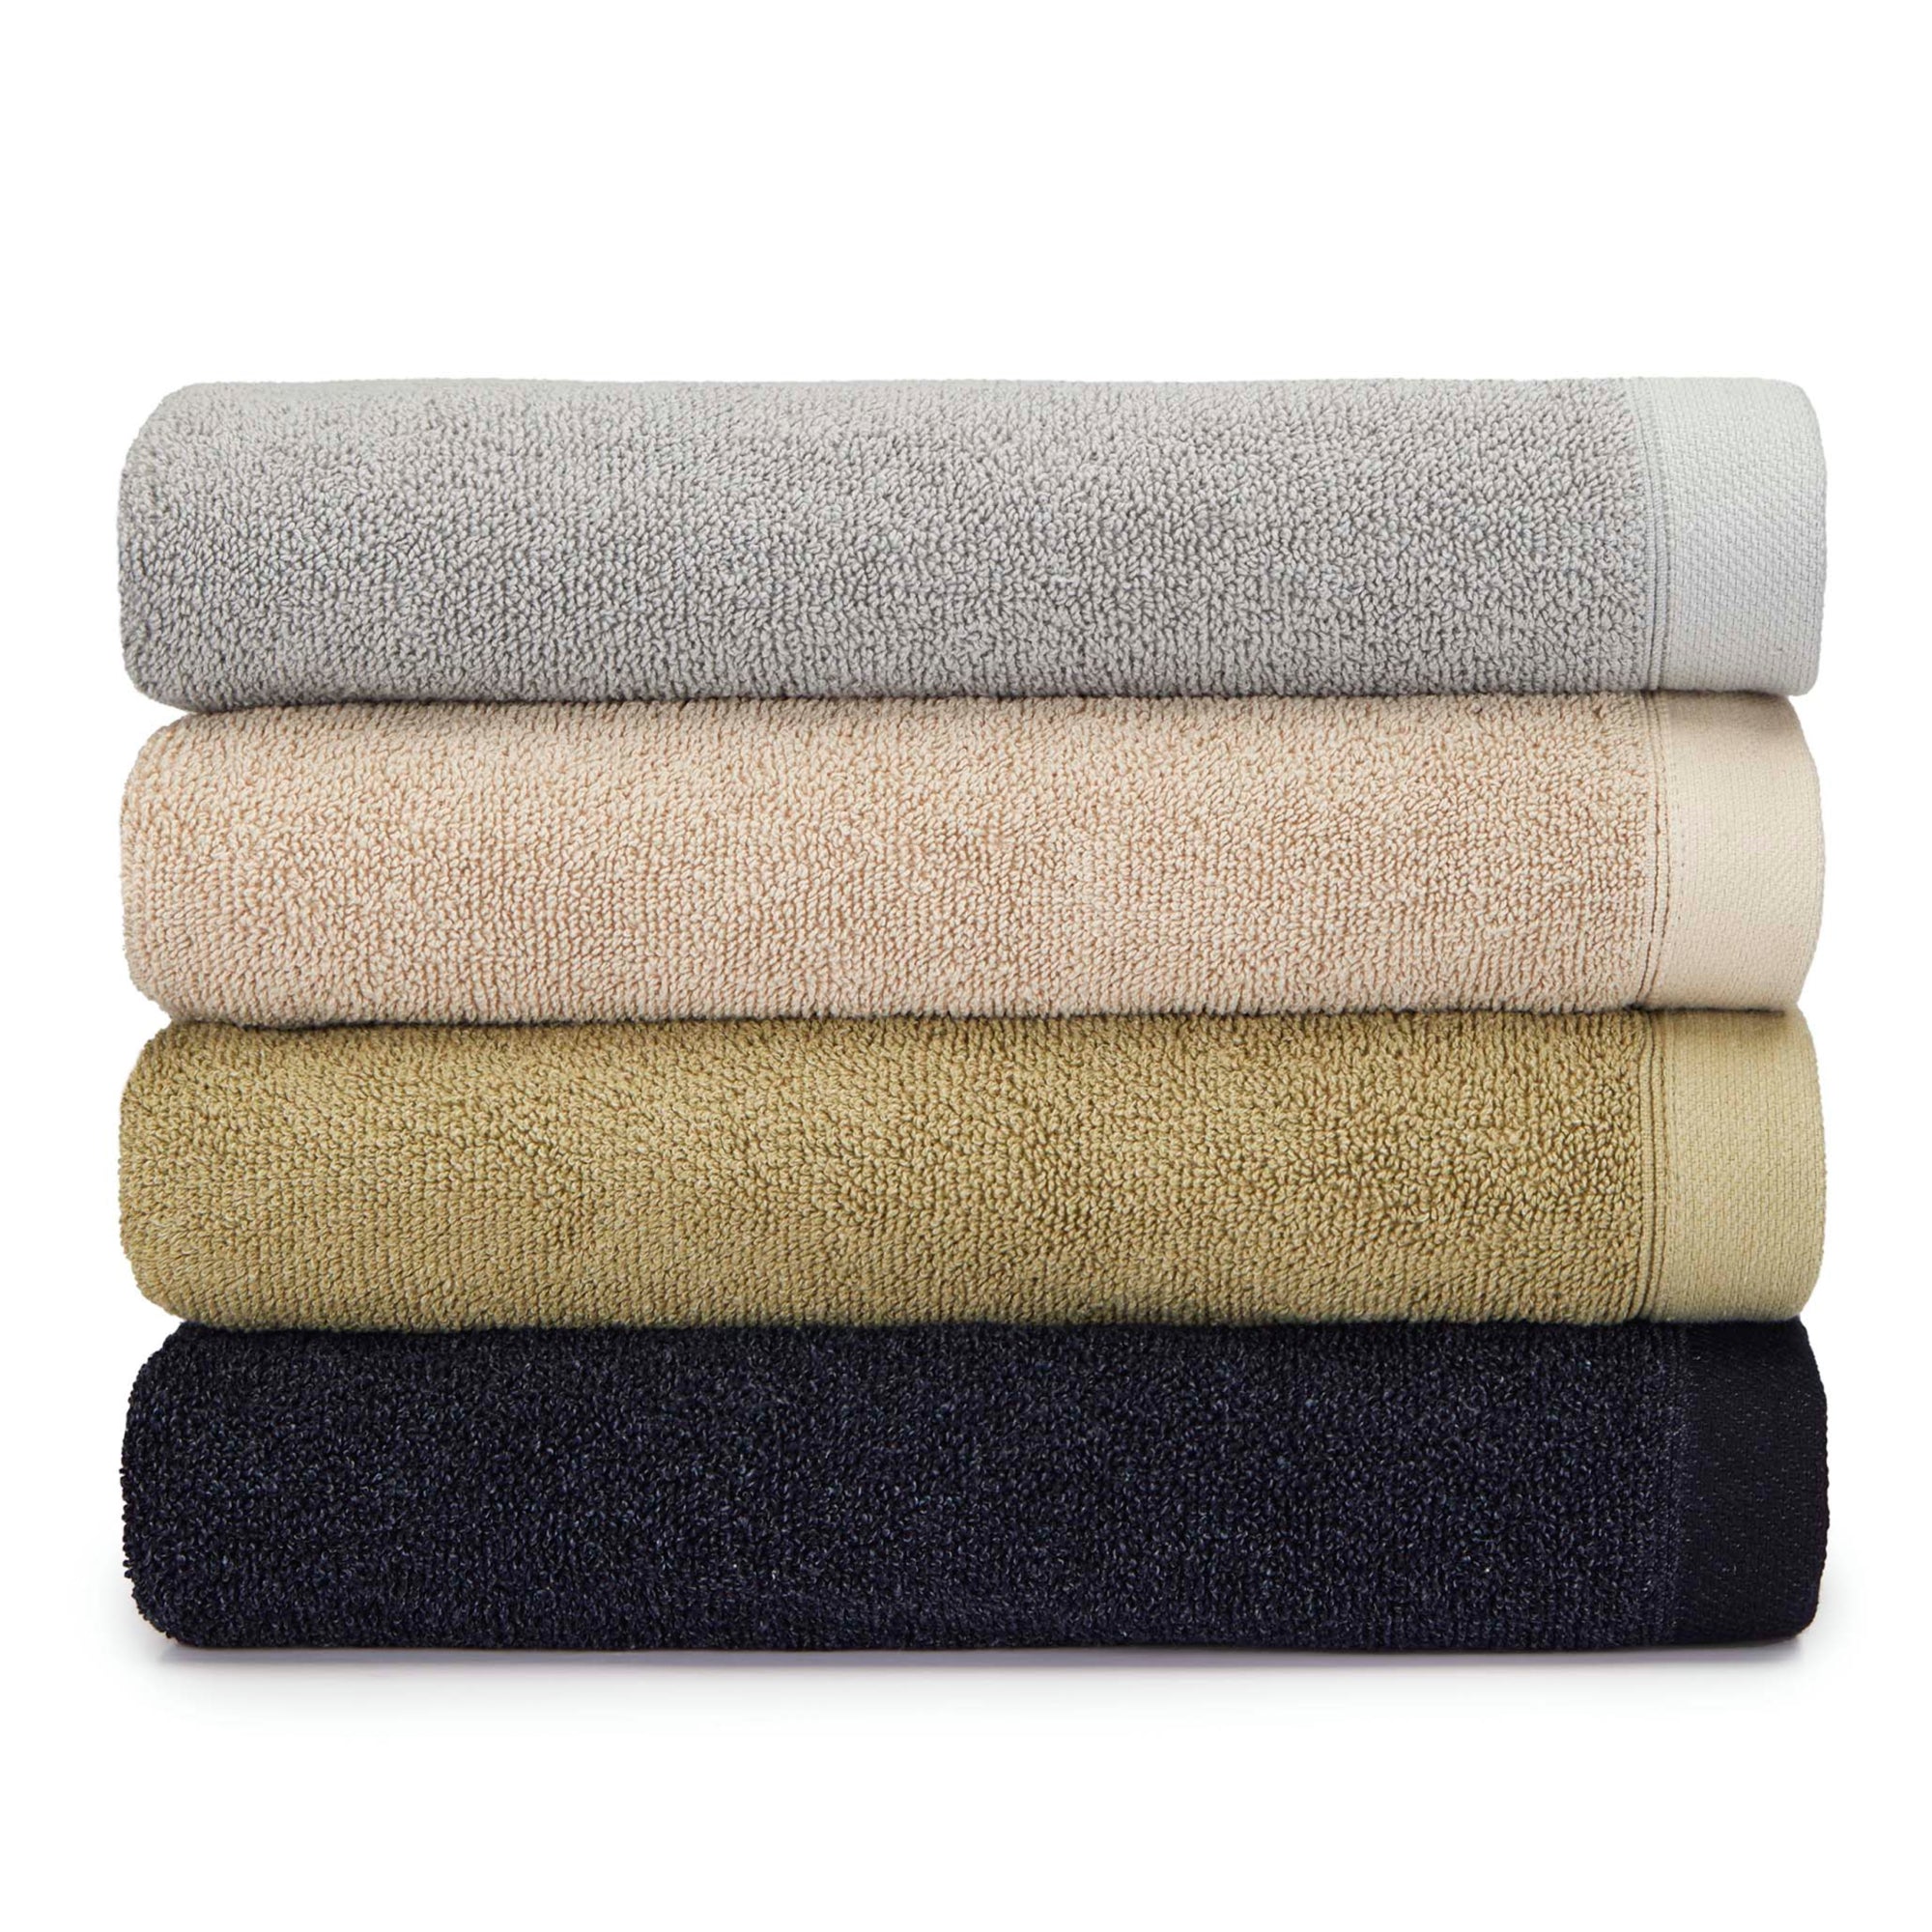 Abode Eco Towels and Bath Sheets by Drift Home in Navy